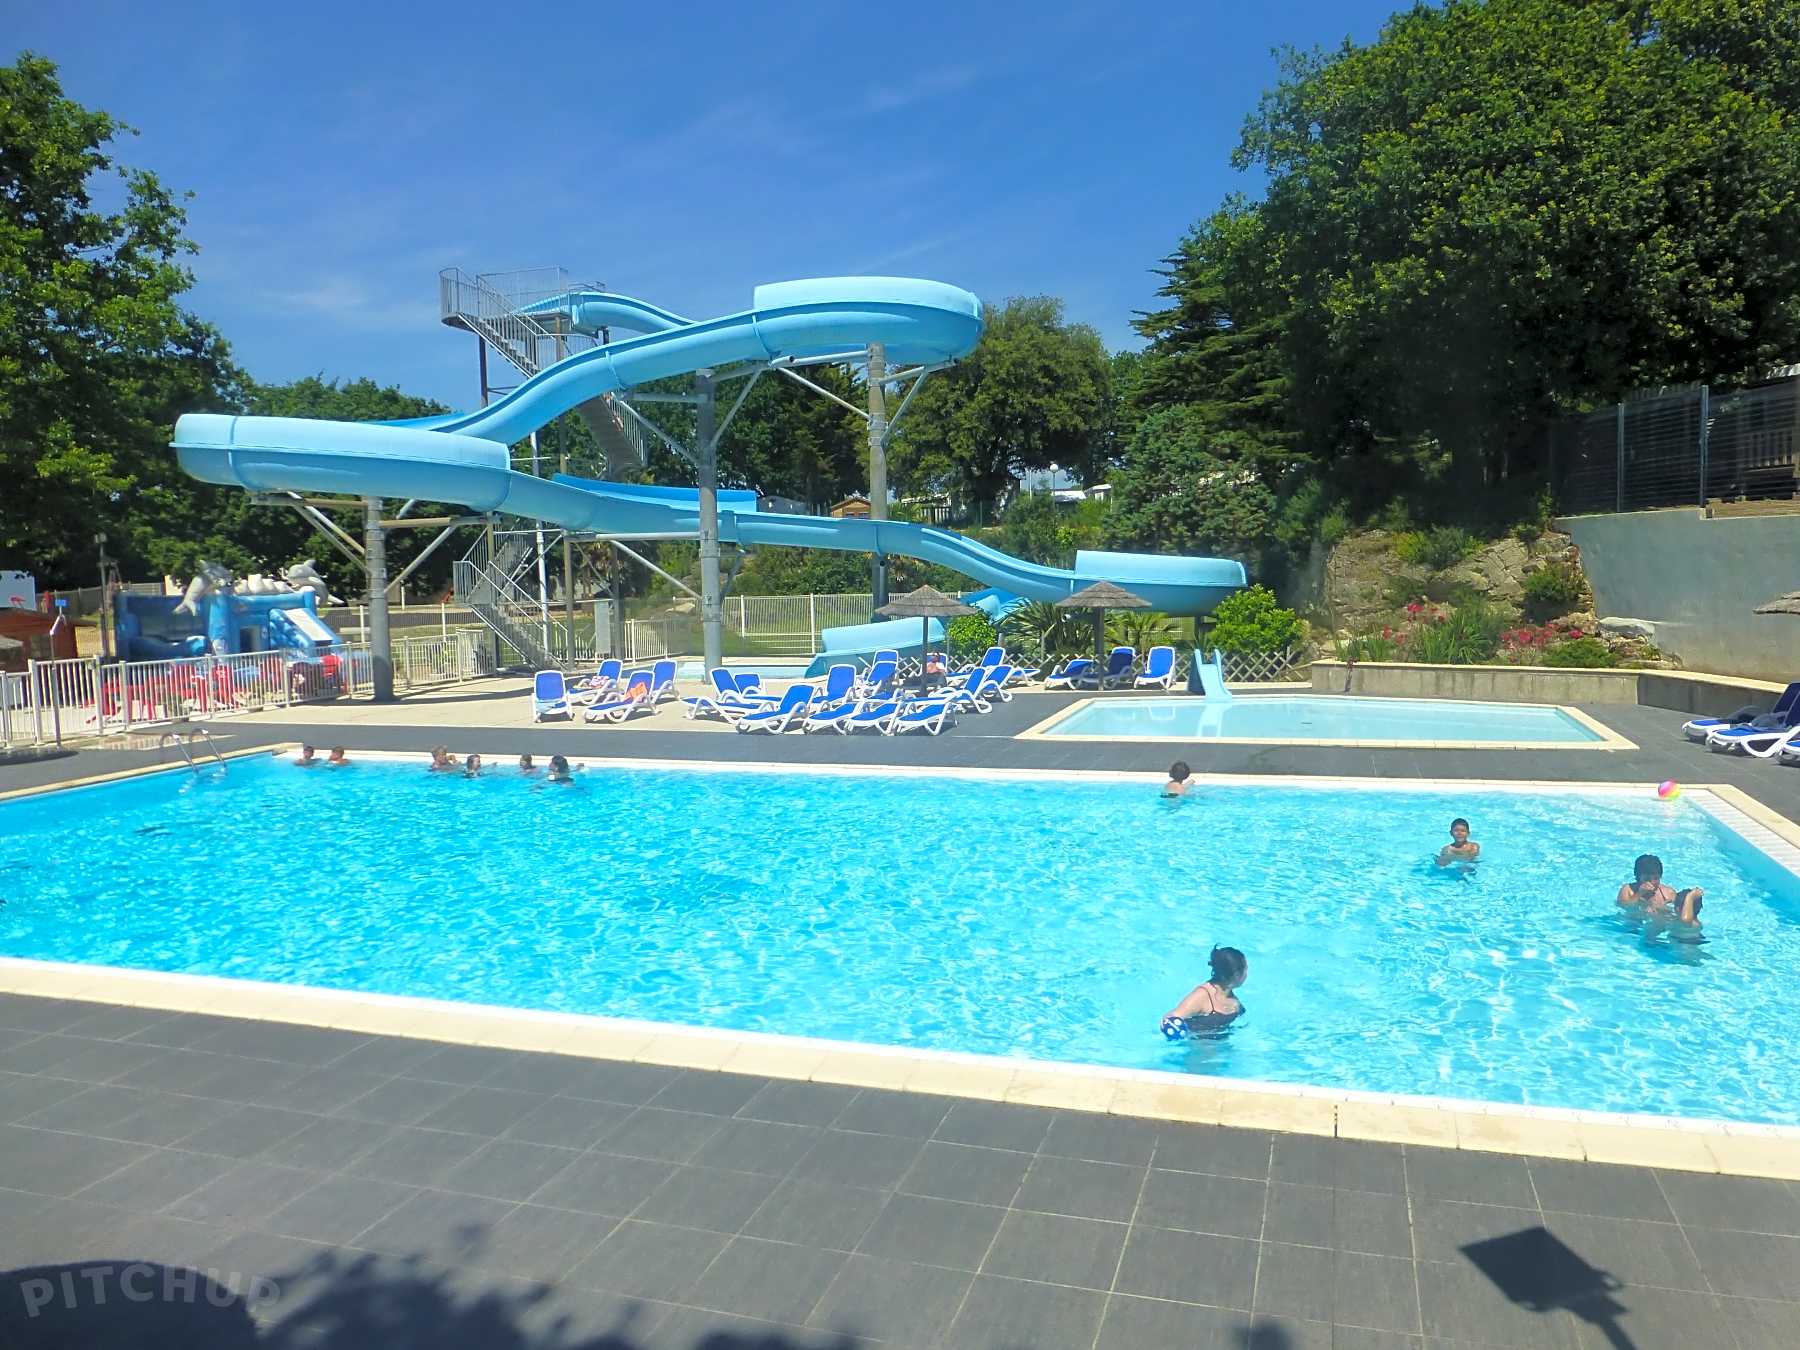 Campsites in Saint-Nazaire, Loire-Atlantique, France from £7/nt - Pitchup